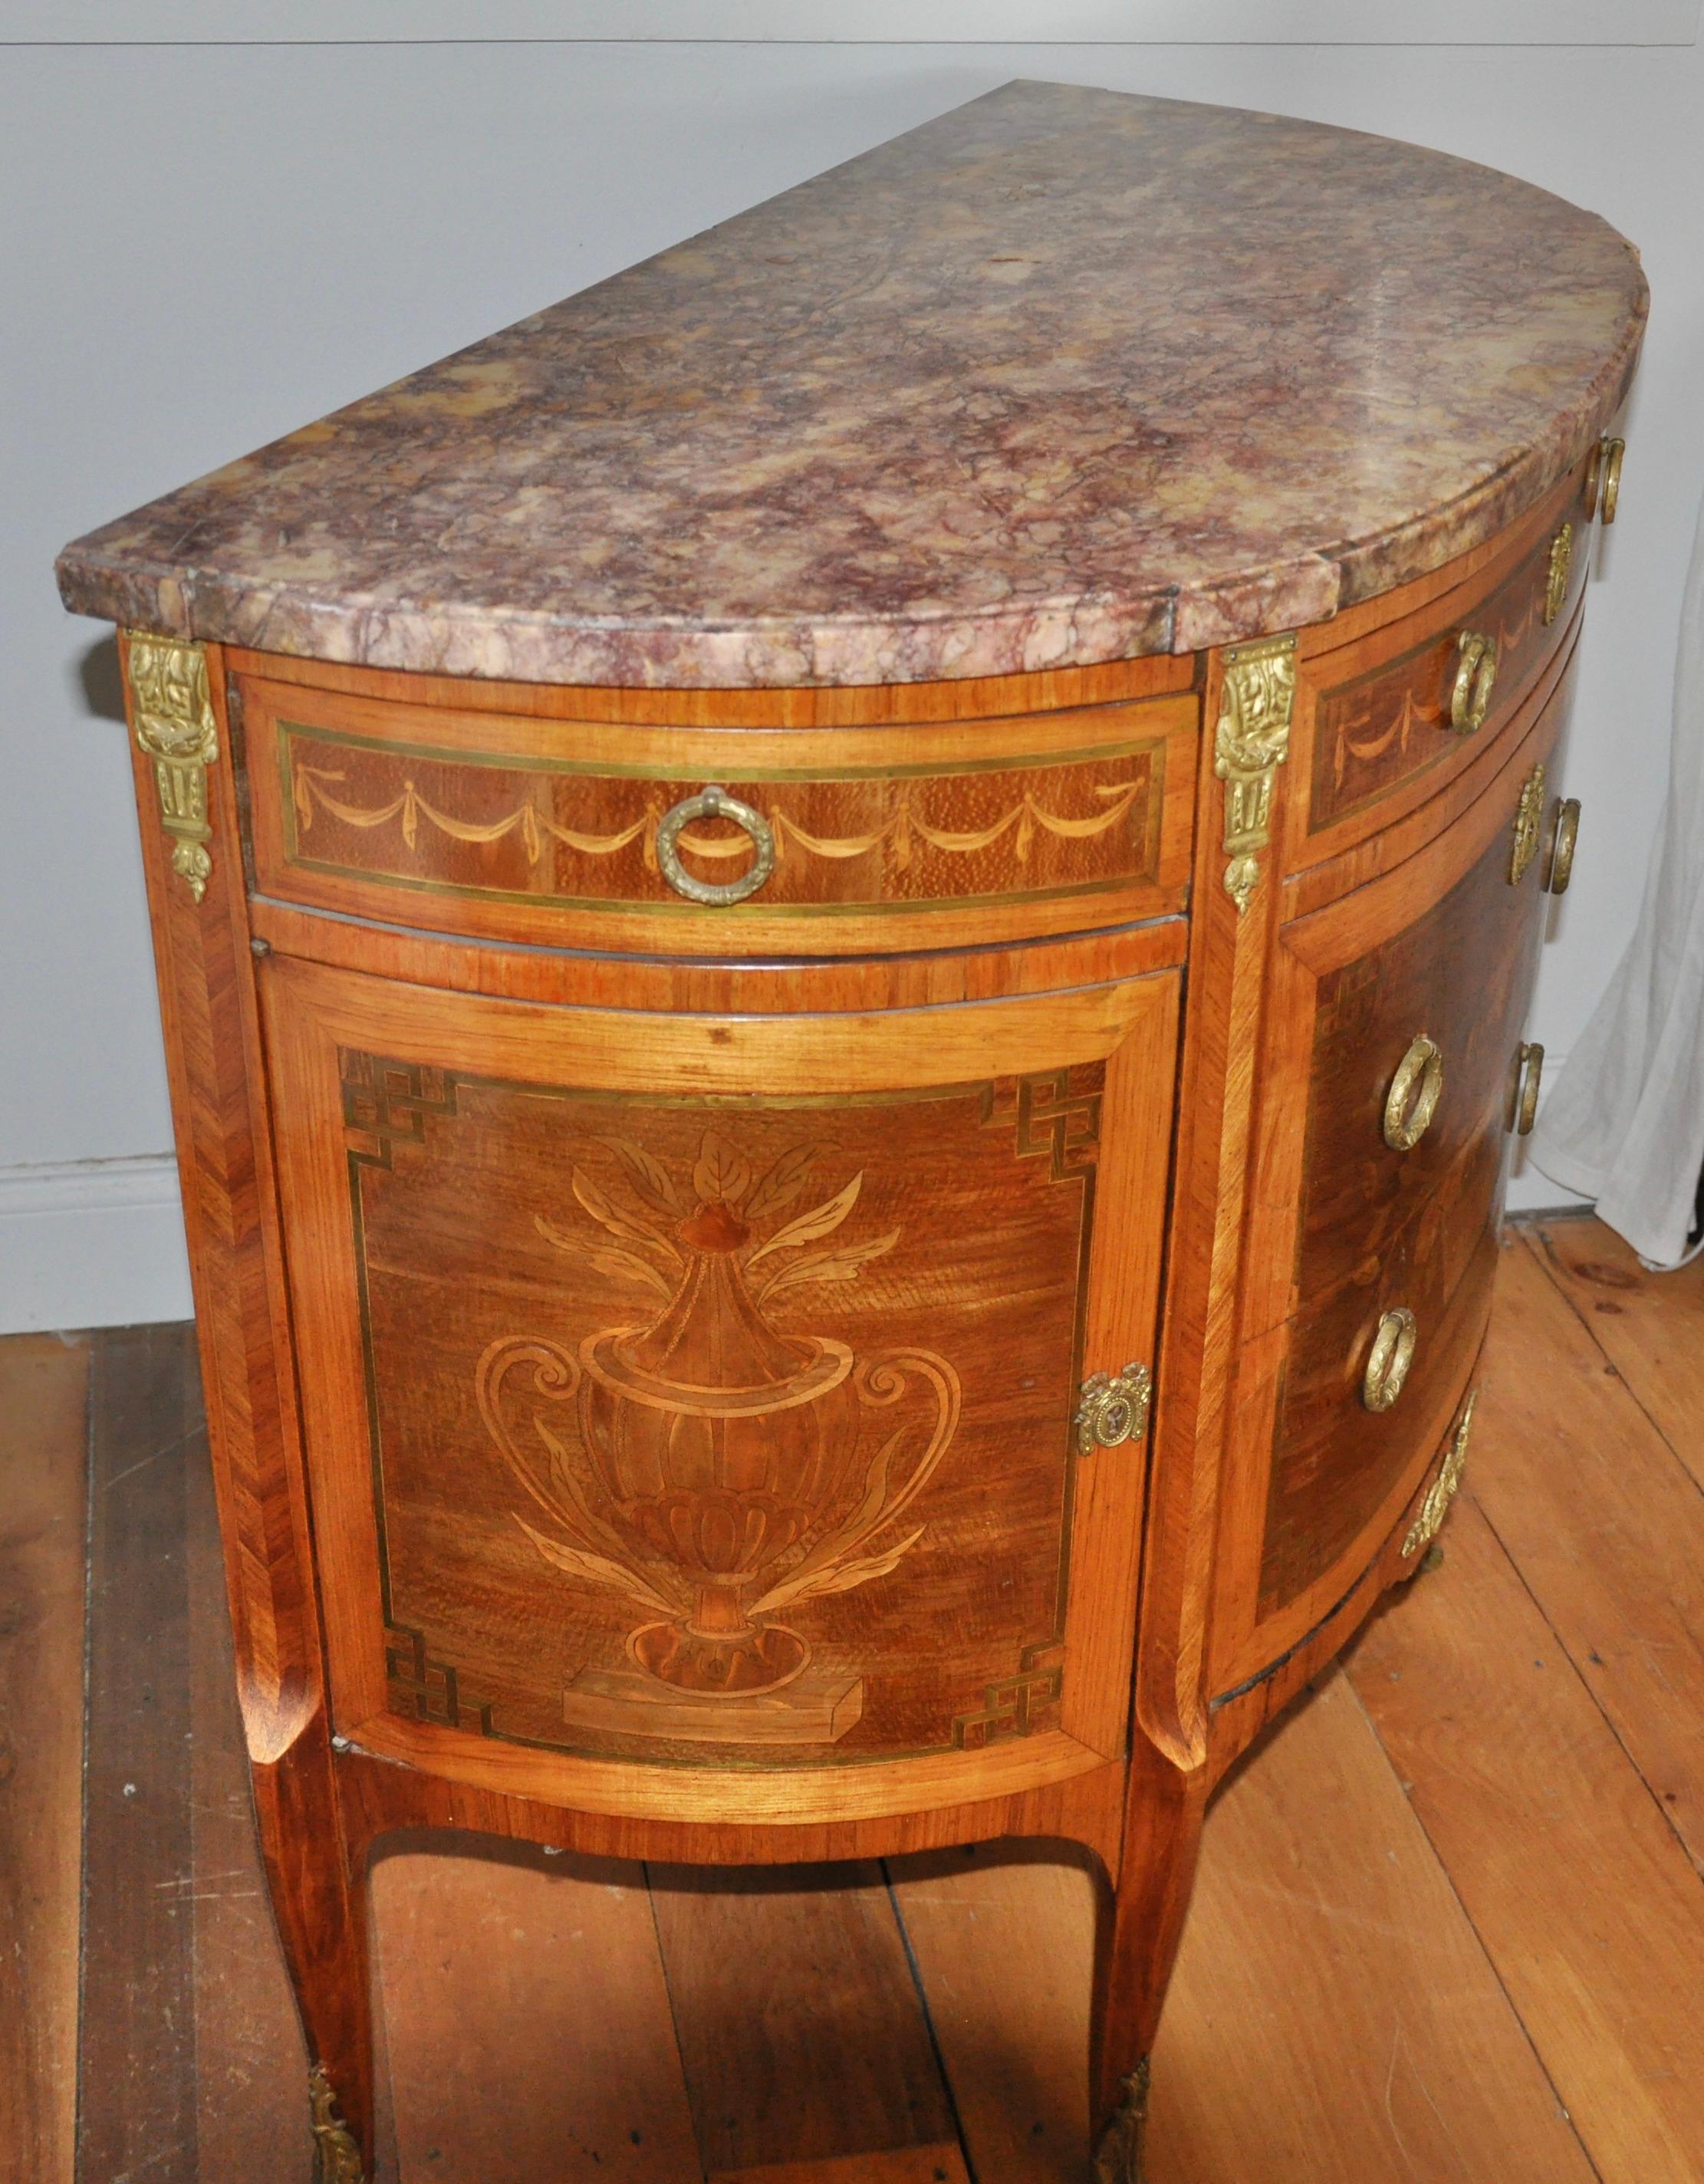 Kingwood Pair of Louis XVI Style Marble-Top Marquetry Inlaid Commodes For Sale